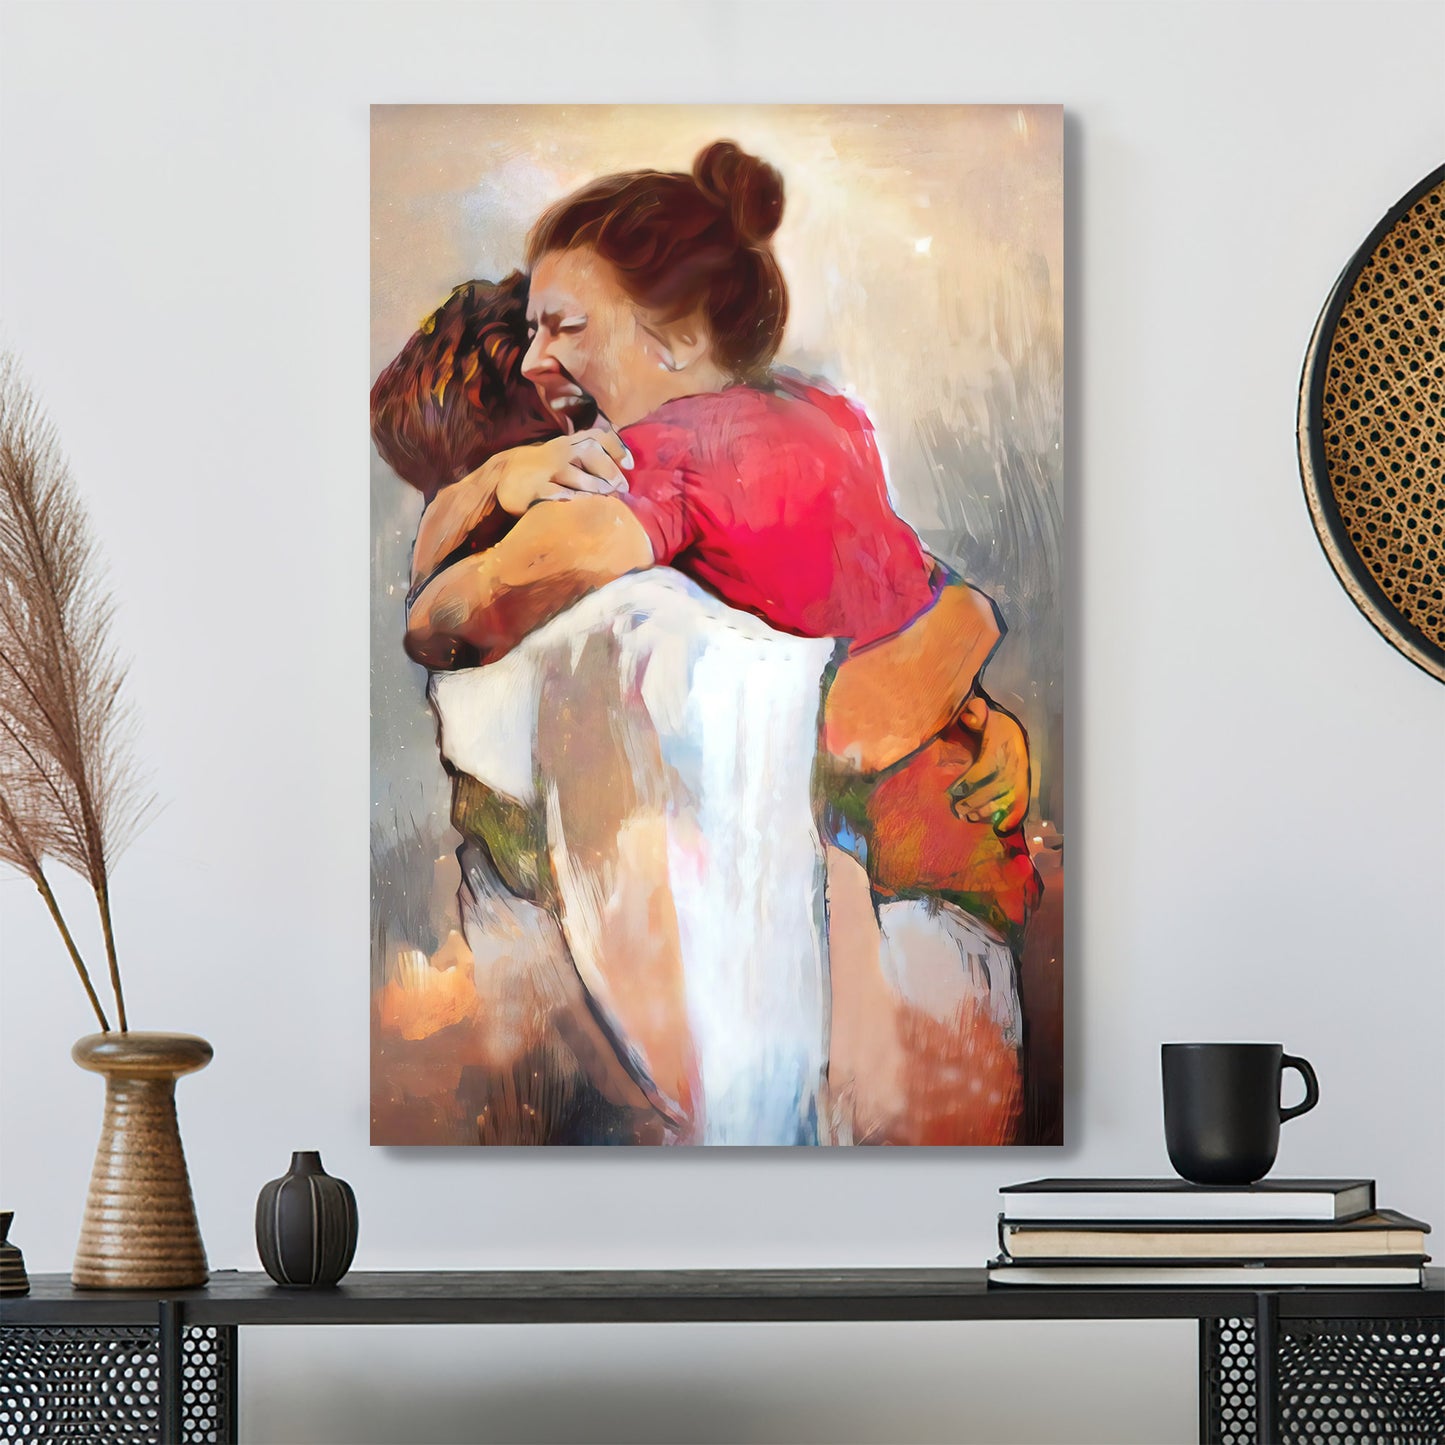 First Day In Heaven Painting - I Held Him And Would Not Let Him Go Canvas Poster - Jesus Canvas - Ciaocustom